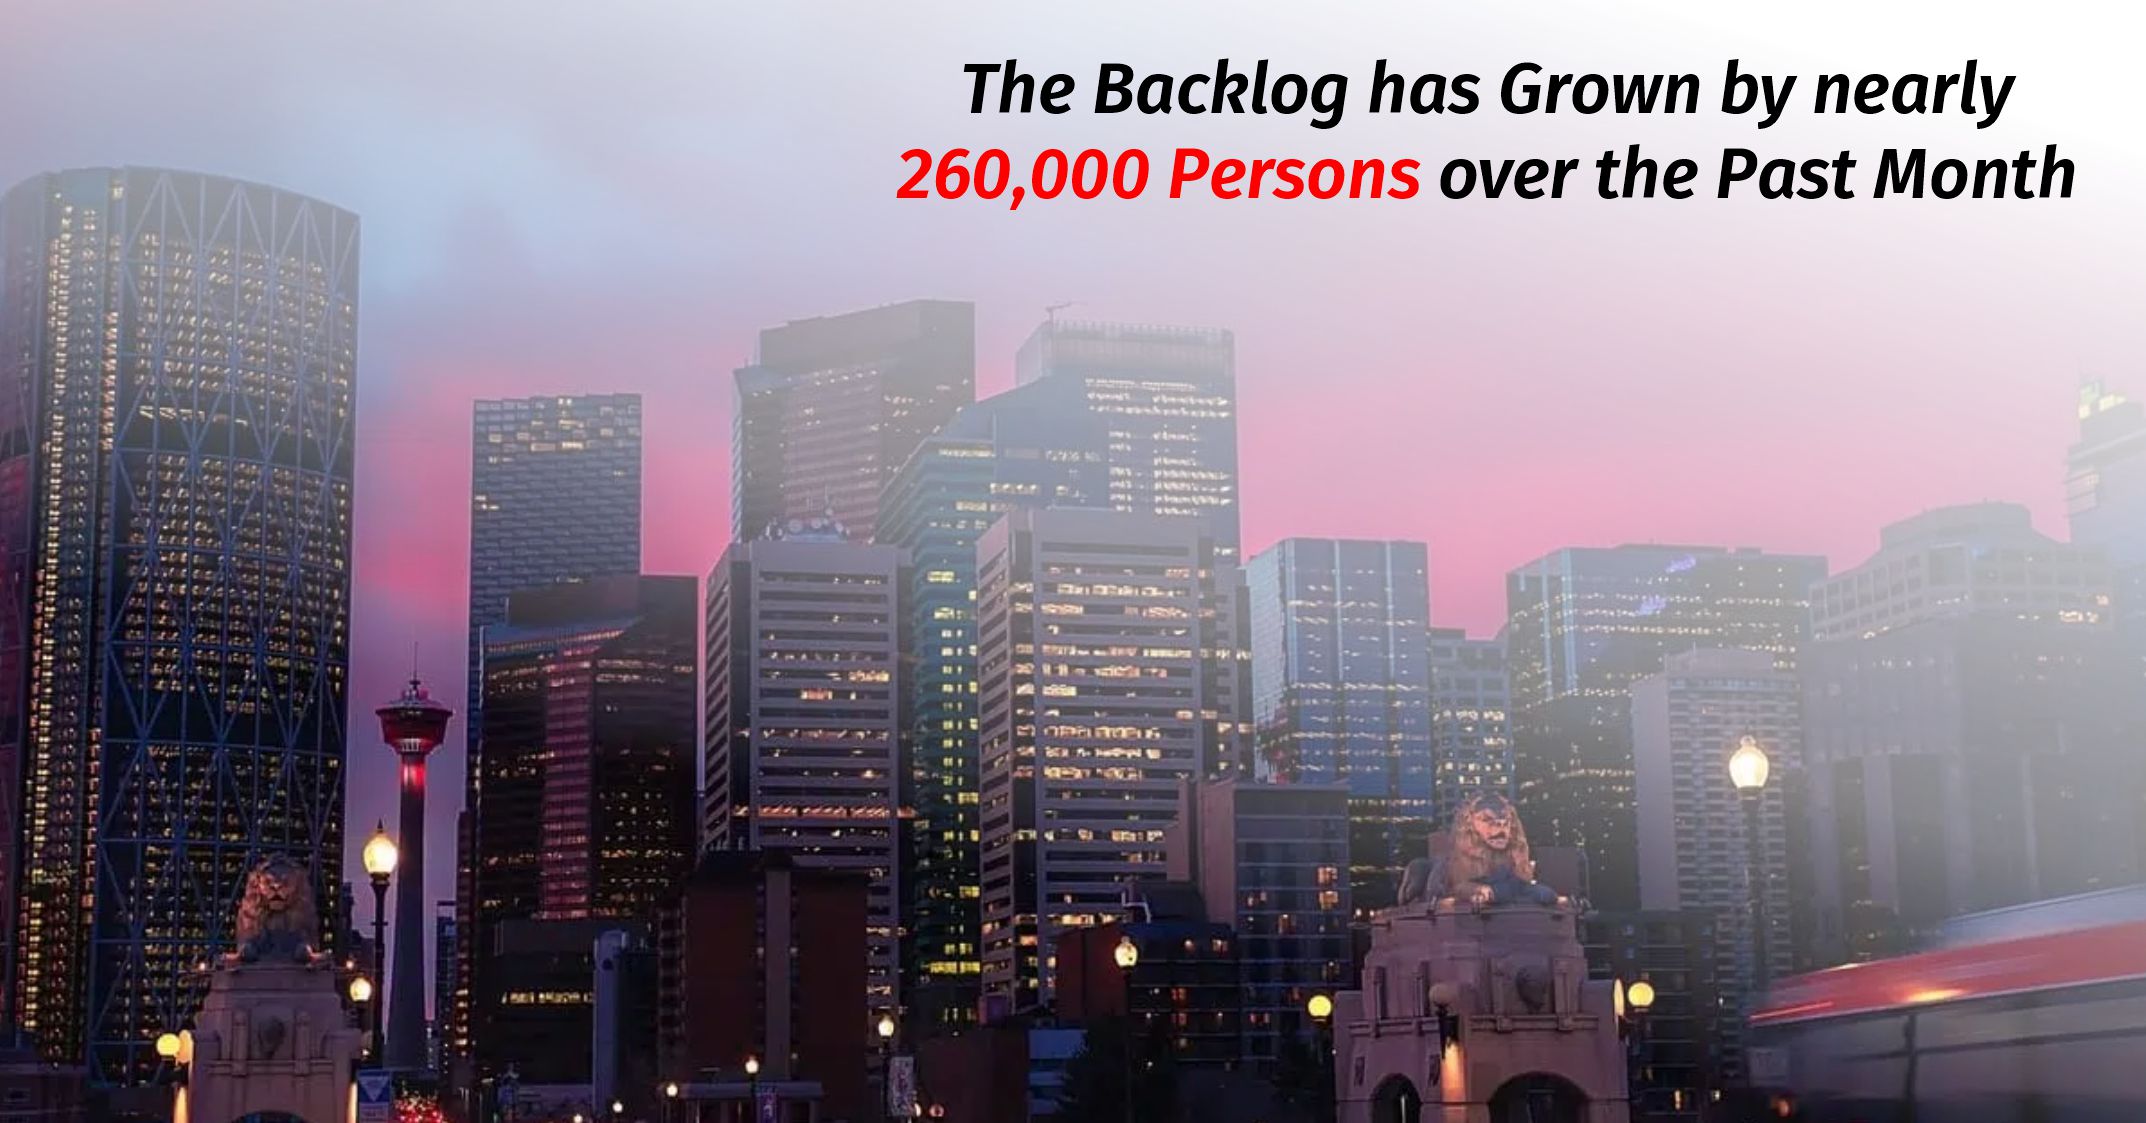 The backlog has grown by nearly 260,000 persons over the past month